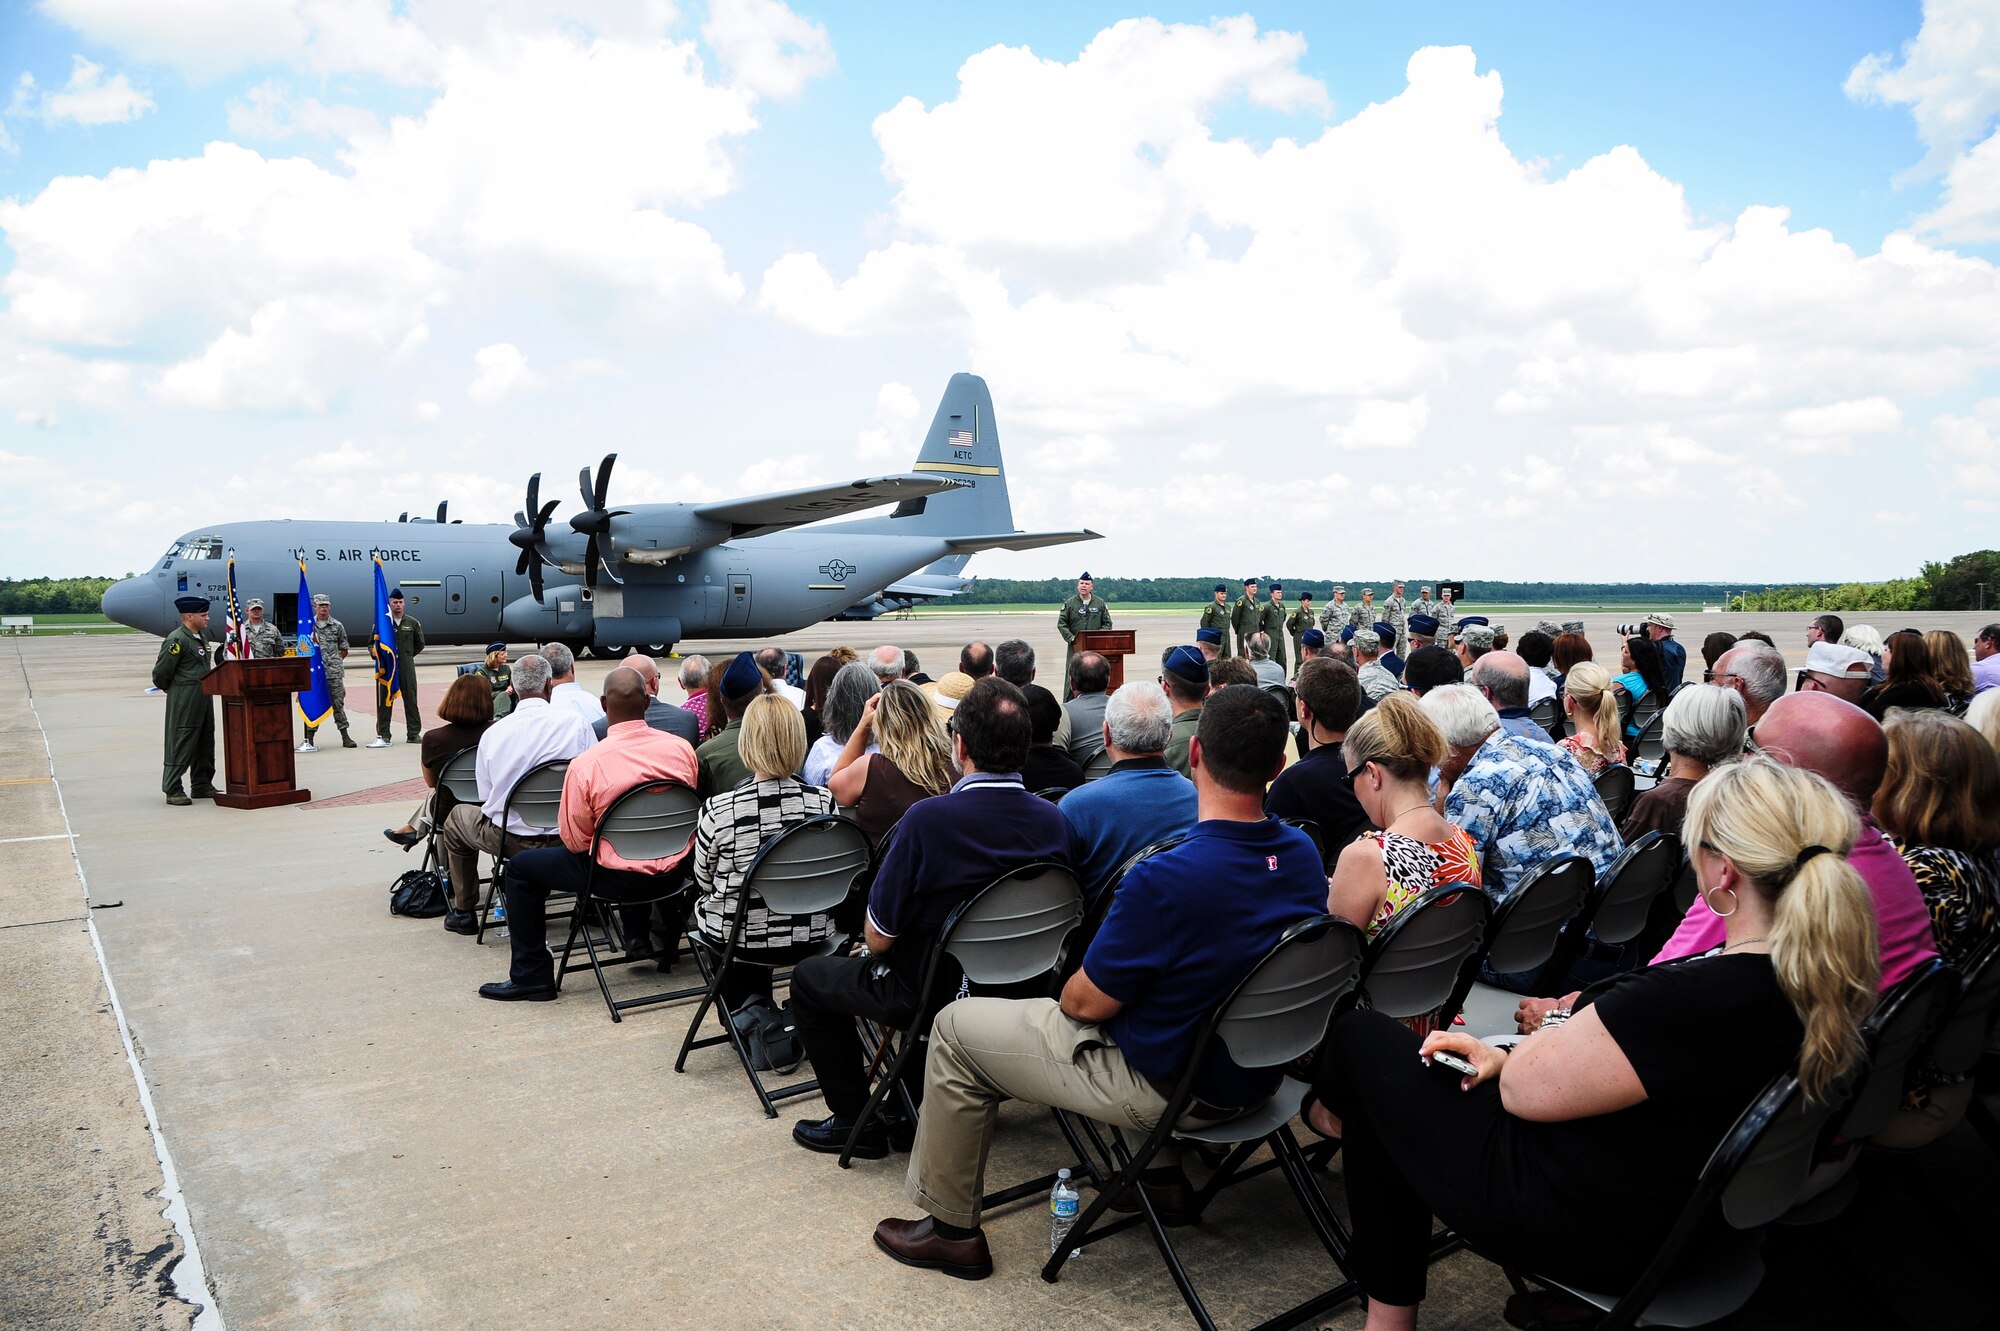 Community and Team Little Rock members listen as Col. Scott Brewer, the 314th Airlift Wing commander, speaks during the C-130J arrival ceremony Aug. 20, 2013 at Little Rock Air Force Base, Ark. C-130J’s have been operating at Little Rock Air Force base since March 2004. (U.S. Air Force photo by Airman 1st Class Kaylee Clark)